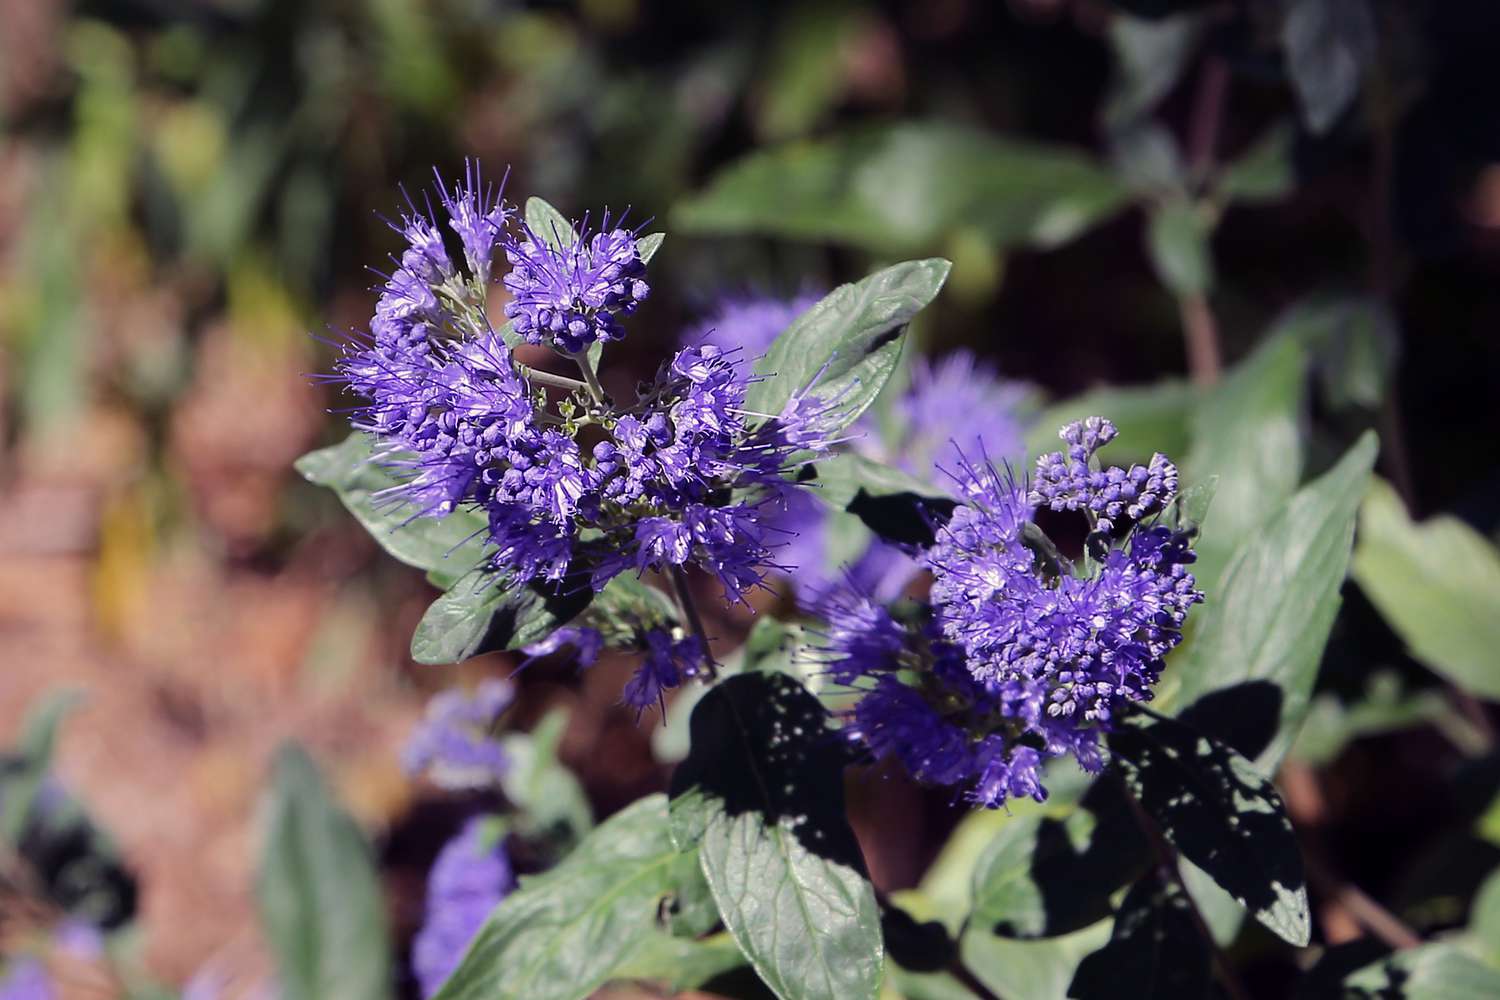 Caryopteris-Strauch in Blüte.